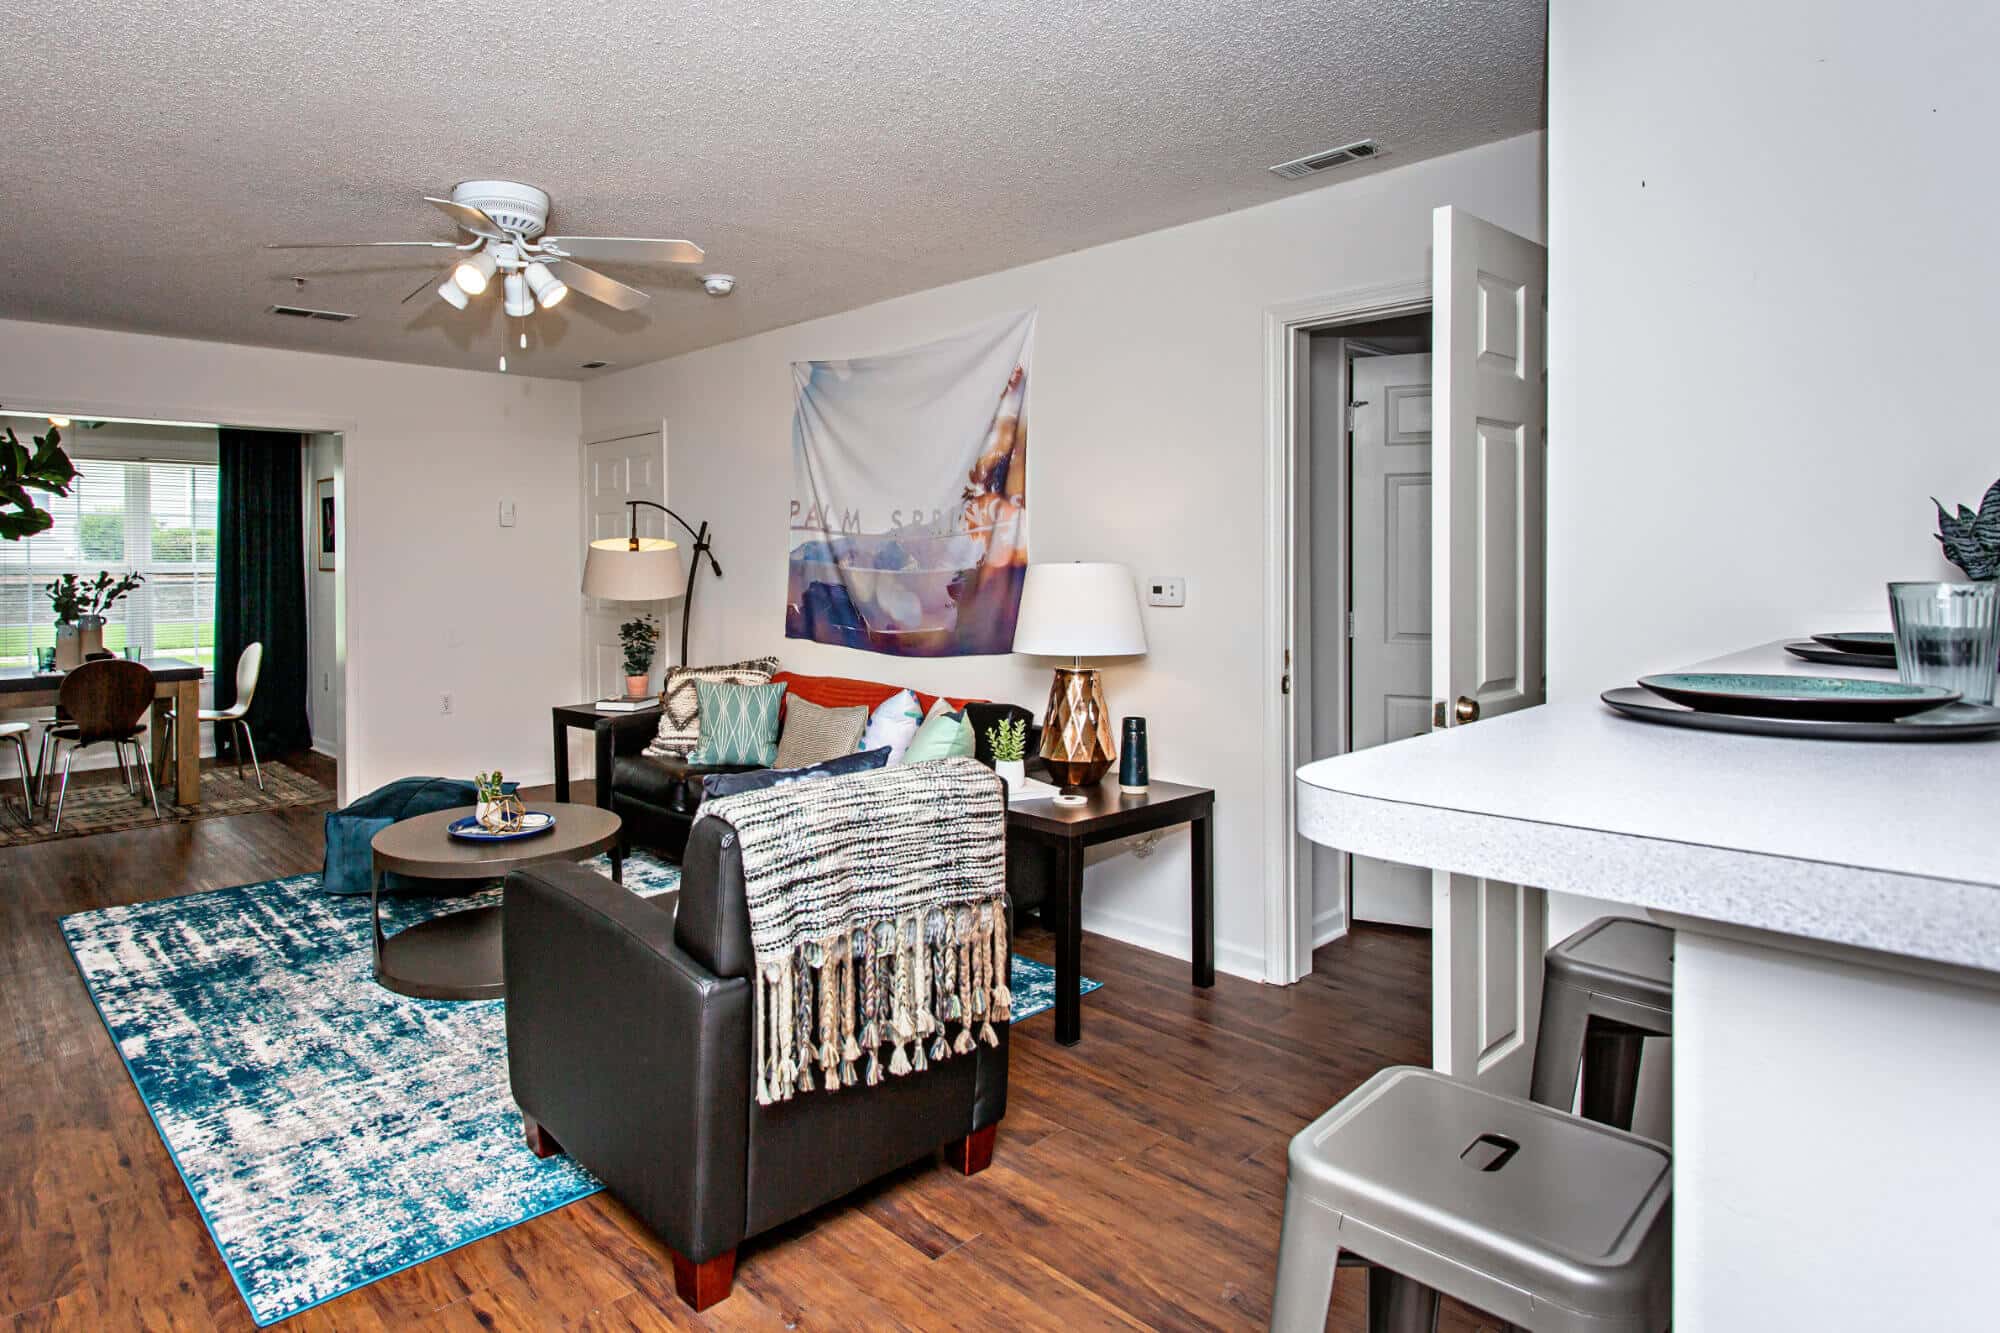 university village at clemson off campus apartments and townhomes near clemson university fully furnished living room and dining area